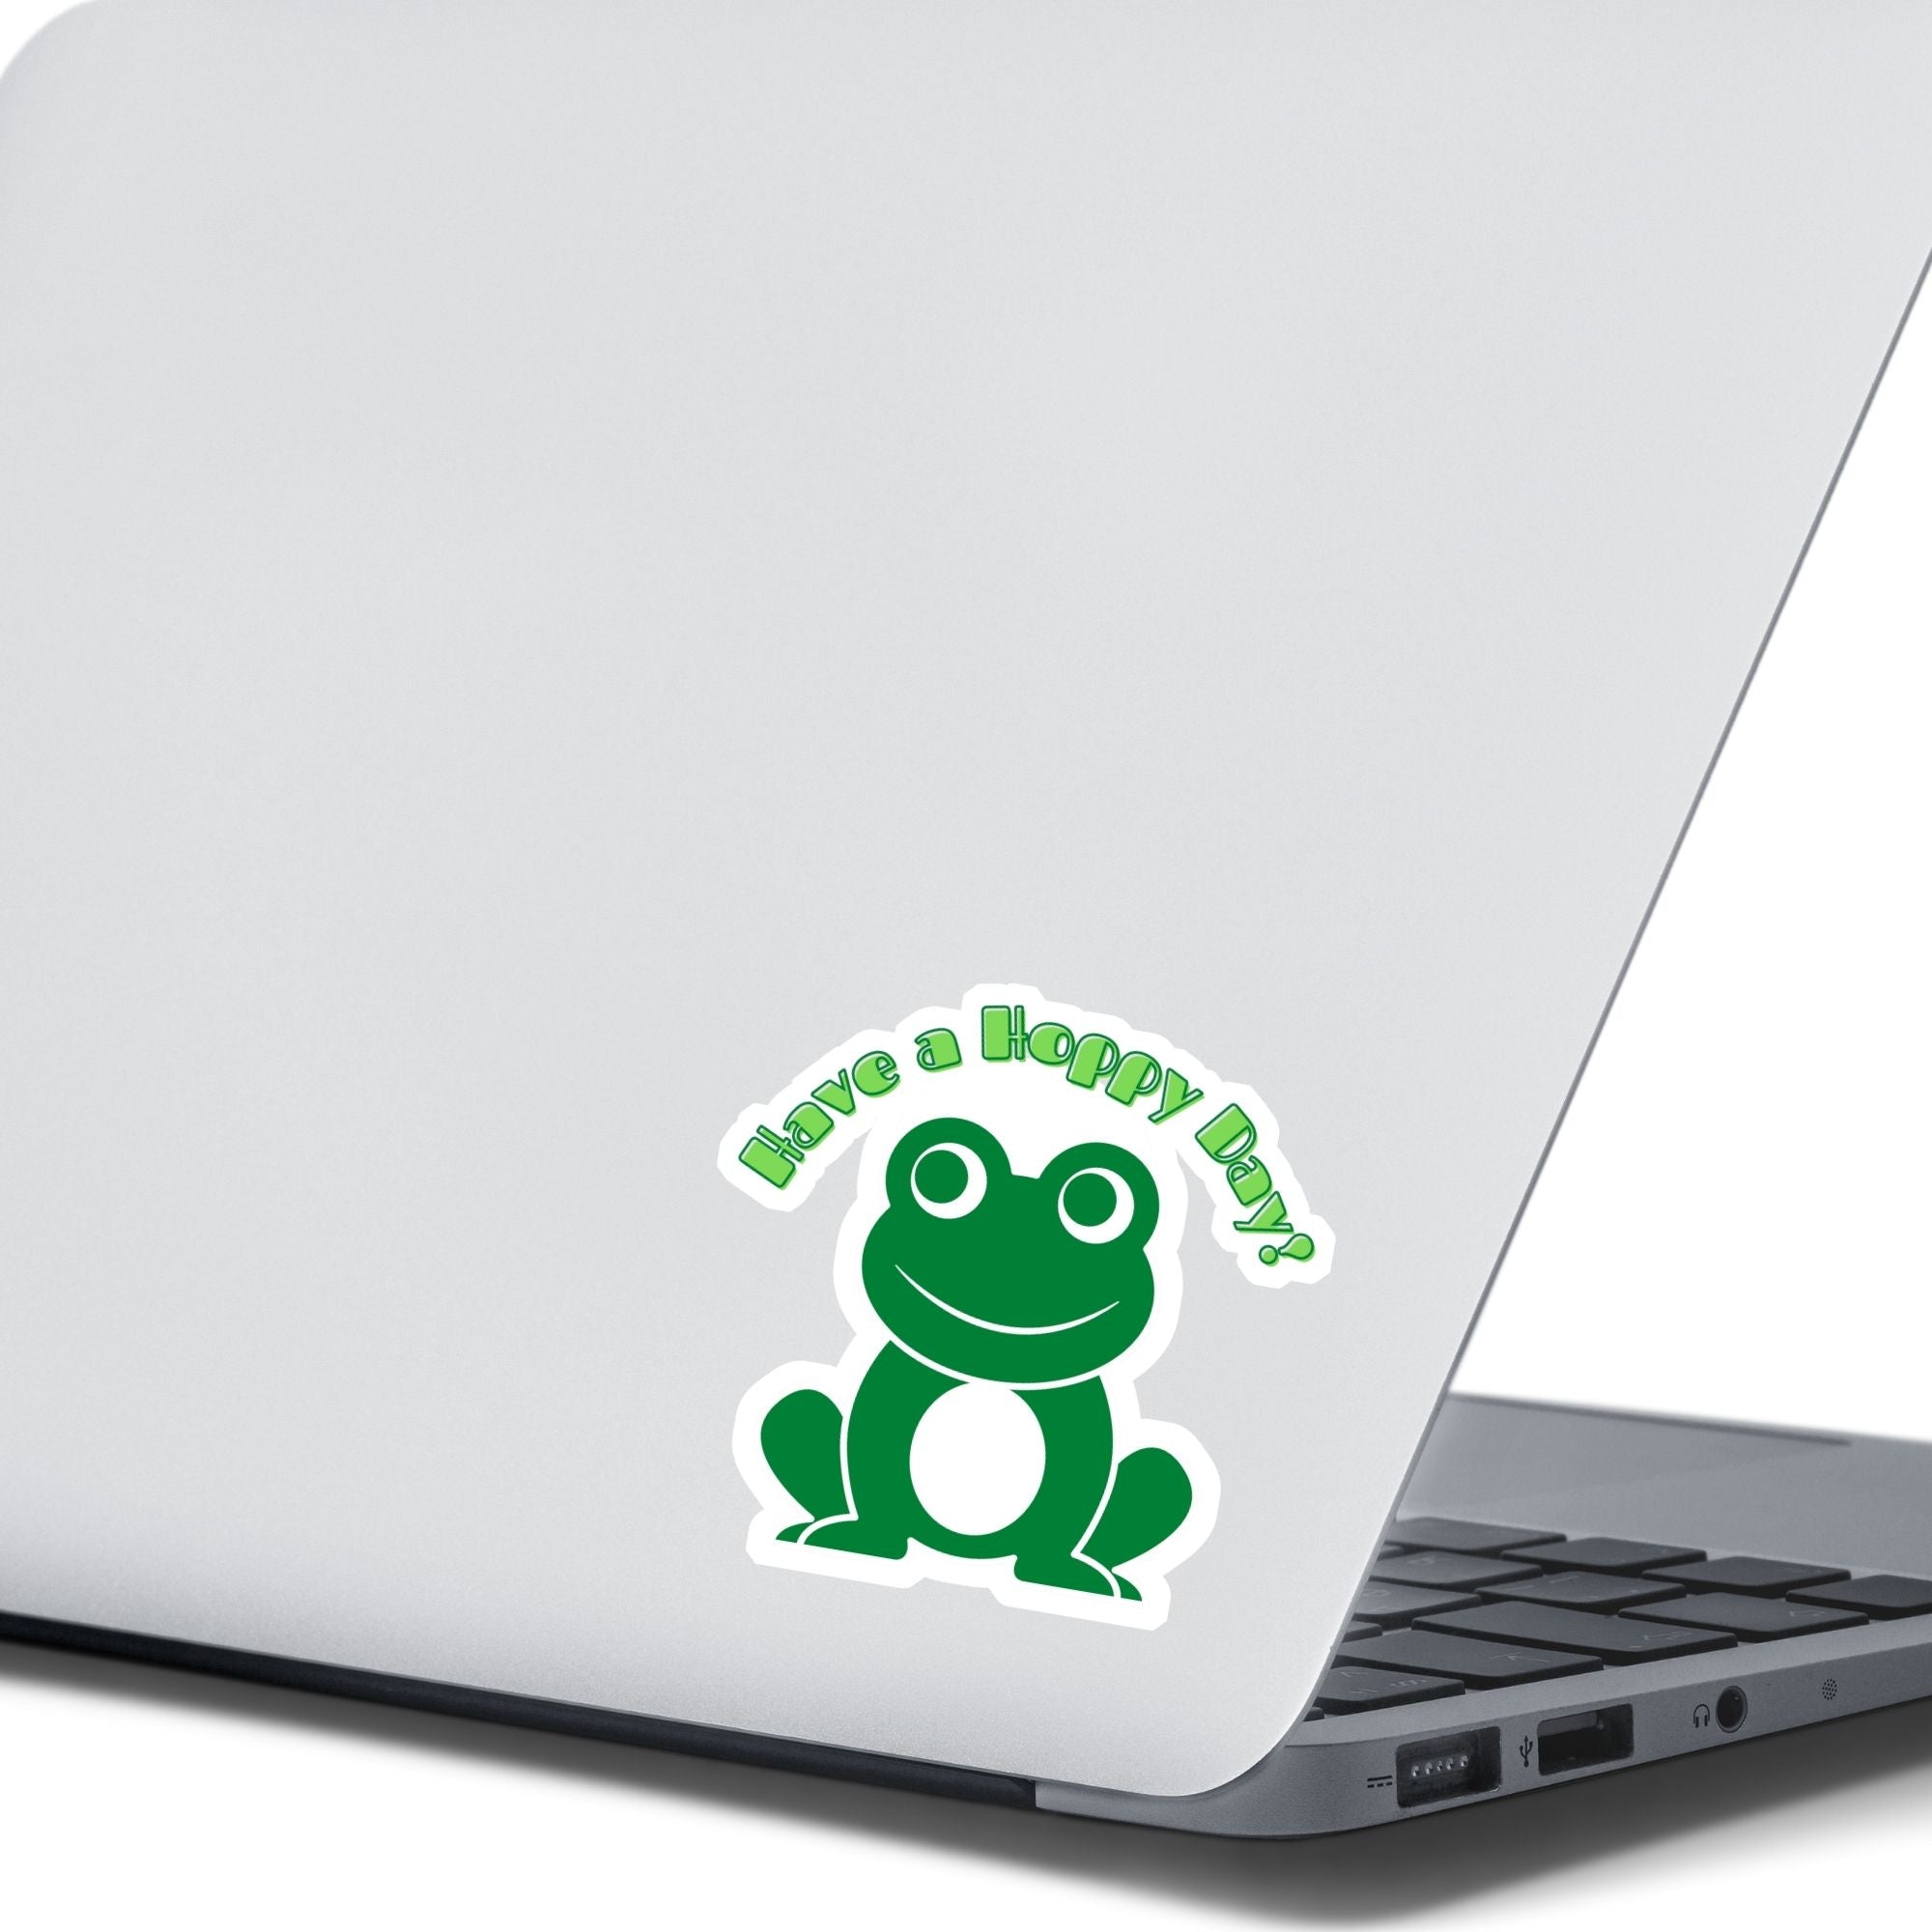 This inspirational sticker features a smiling frog with "Have a Hoppy Day!" written above. This image shows the Have a Hoppy Day sticker on the back of an open laptop.